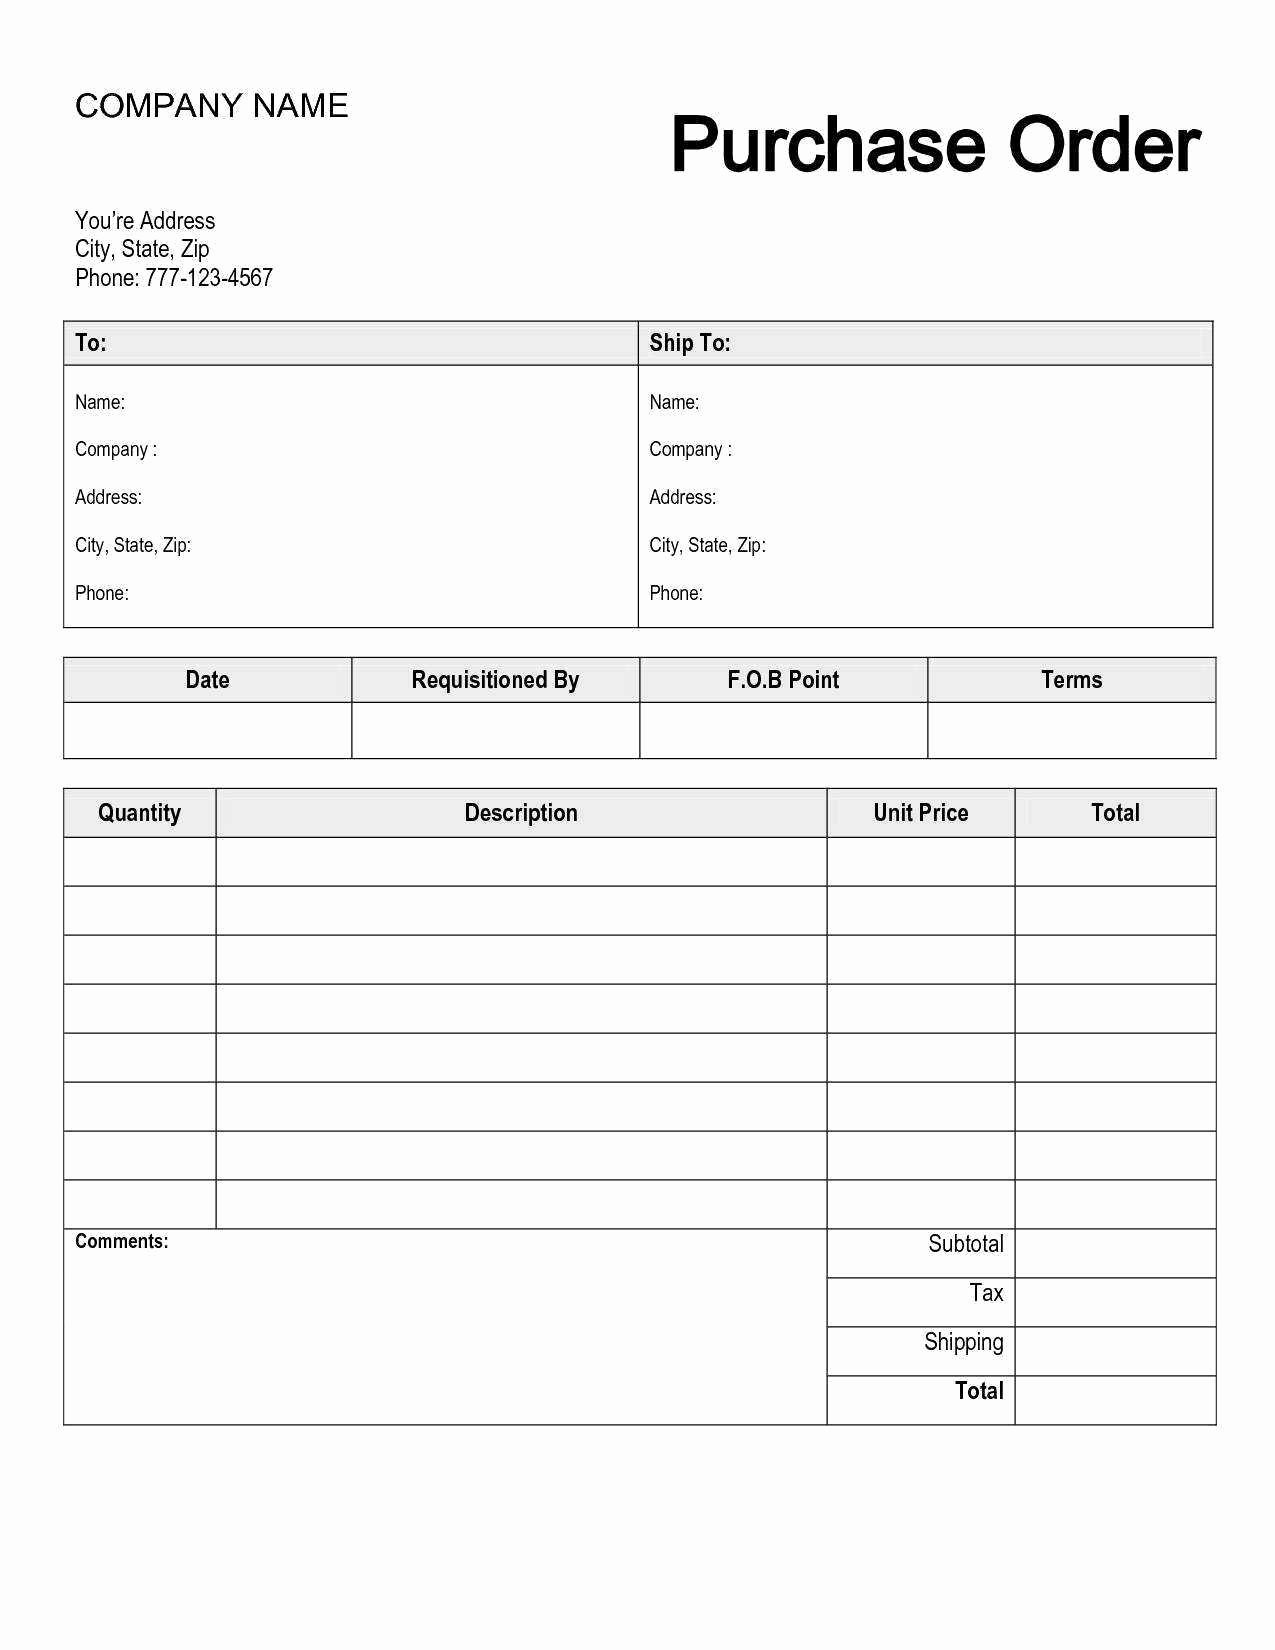 Order form Template Excel Awesome Free Purchase order form Template Excel Image – 53